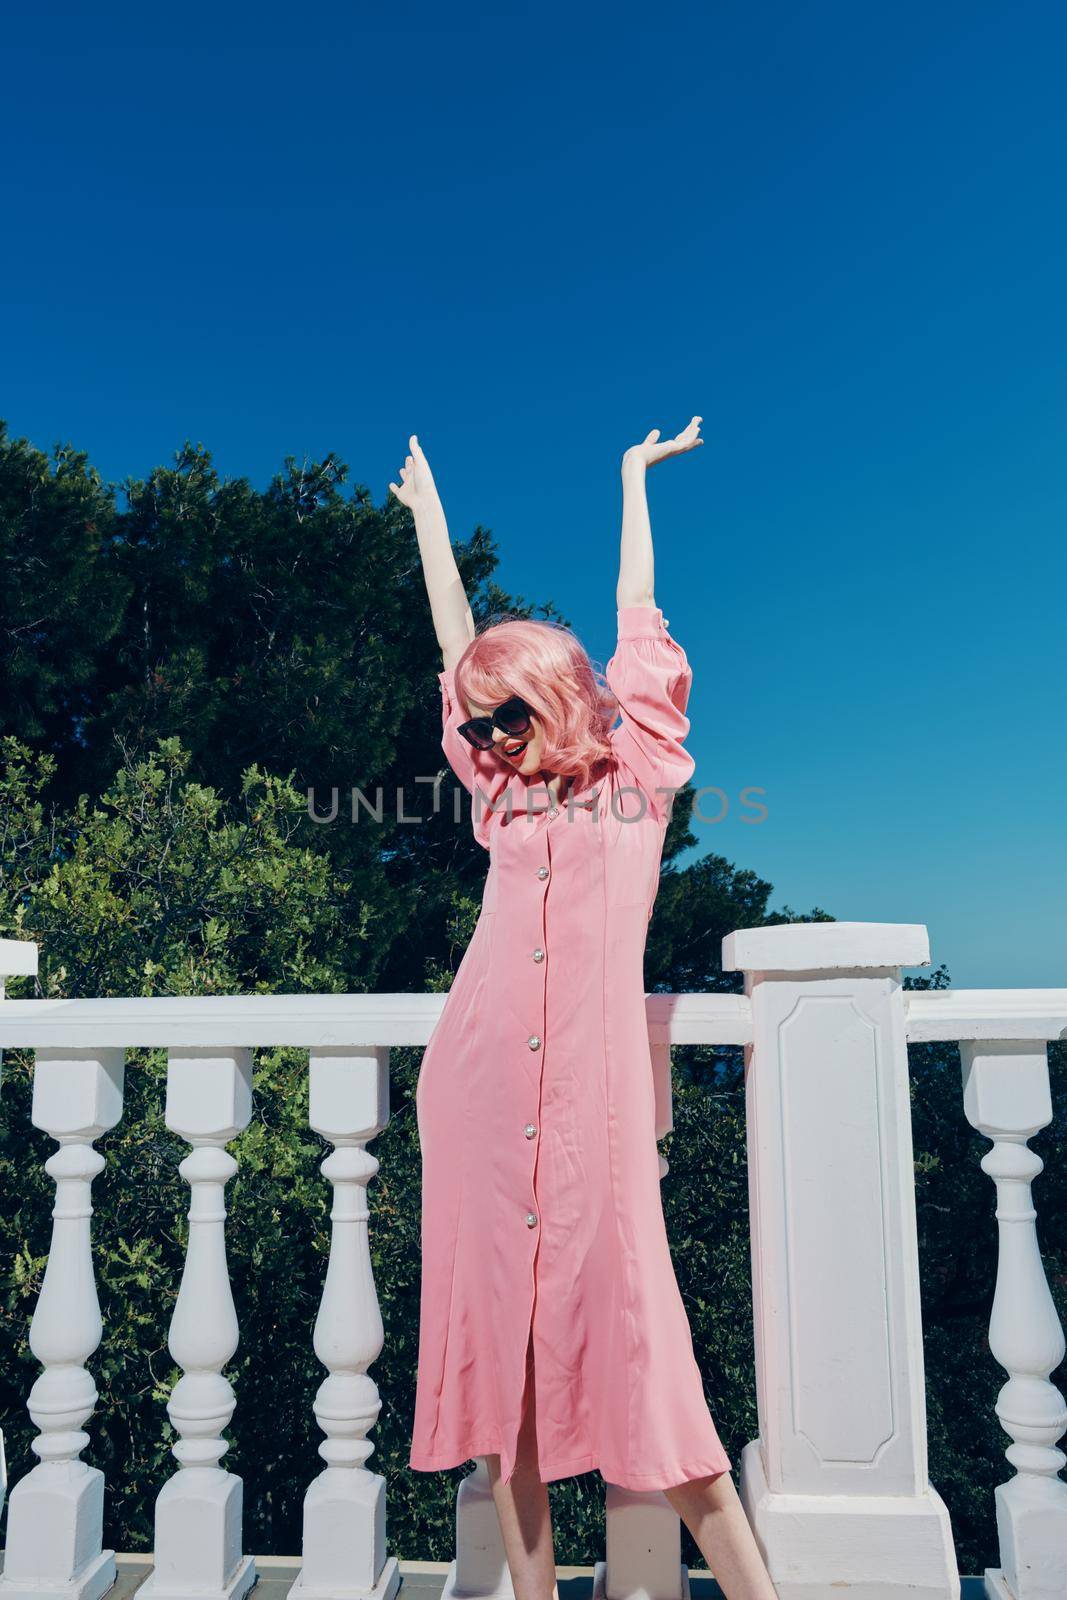 attractive woman pink dress modern style stands near the railing unaltered. High quality photo